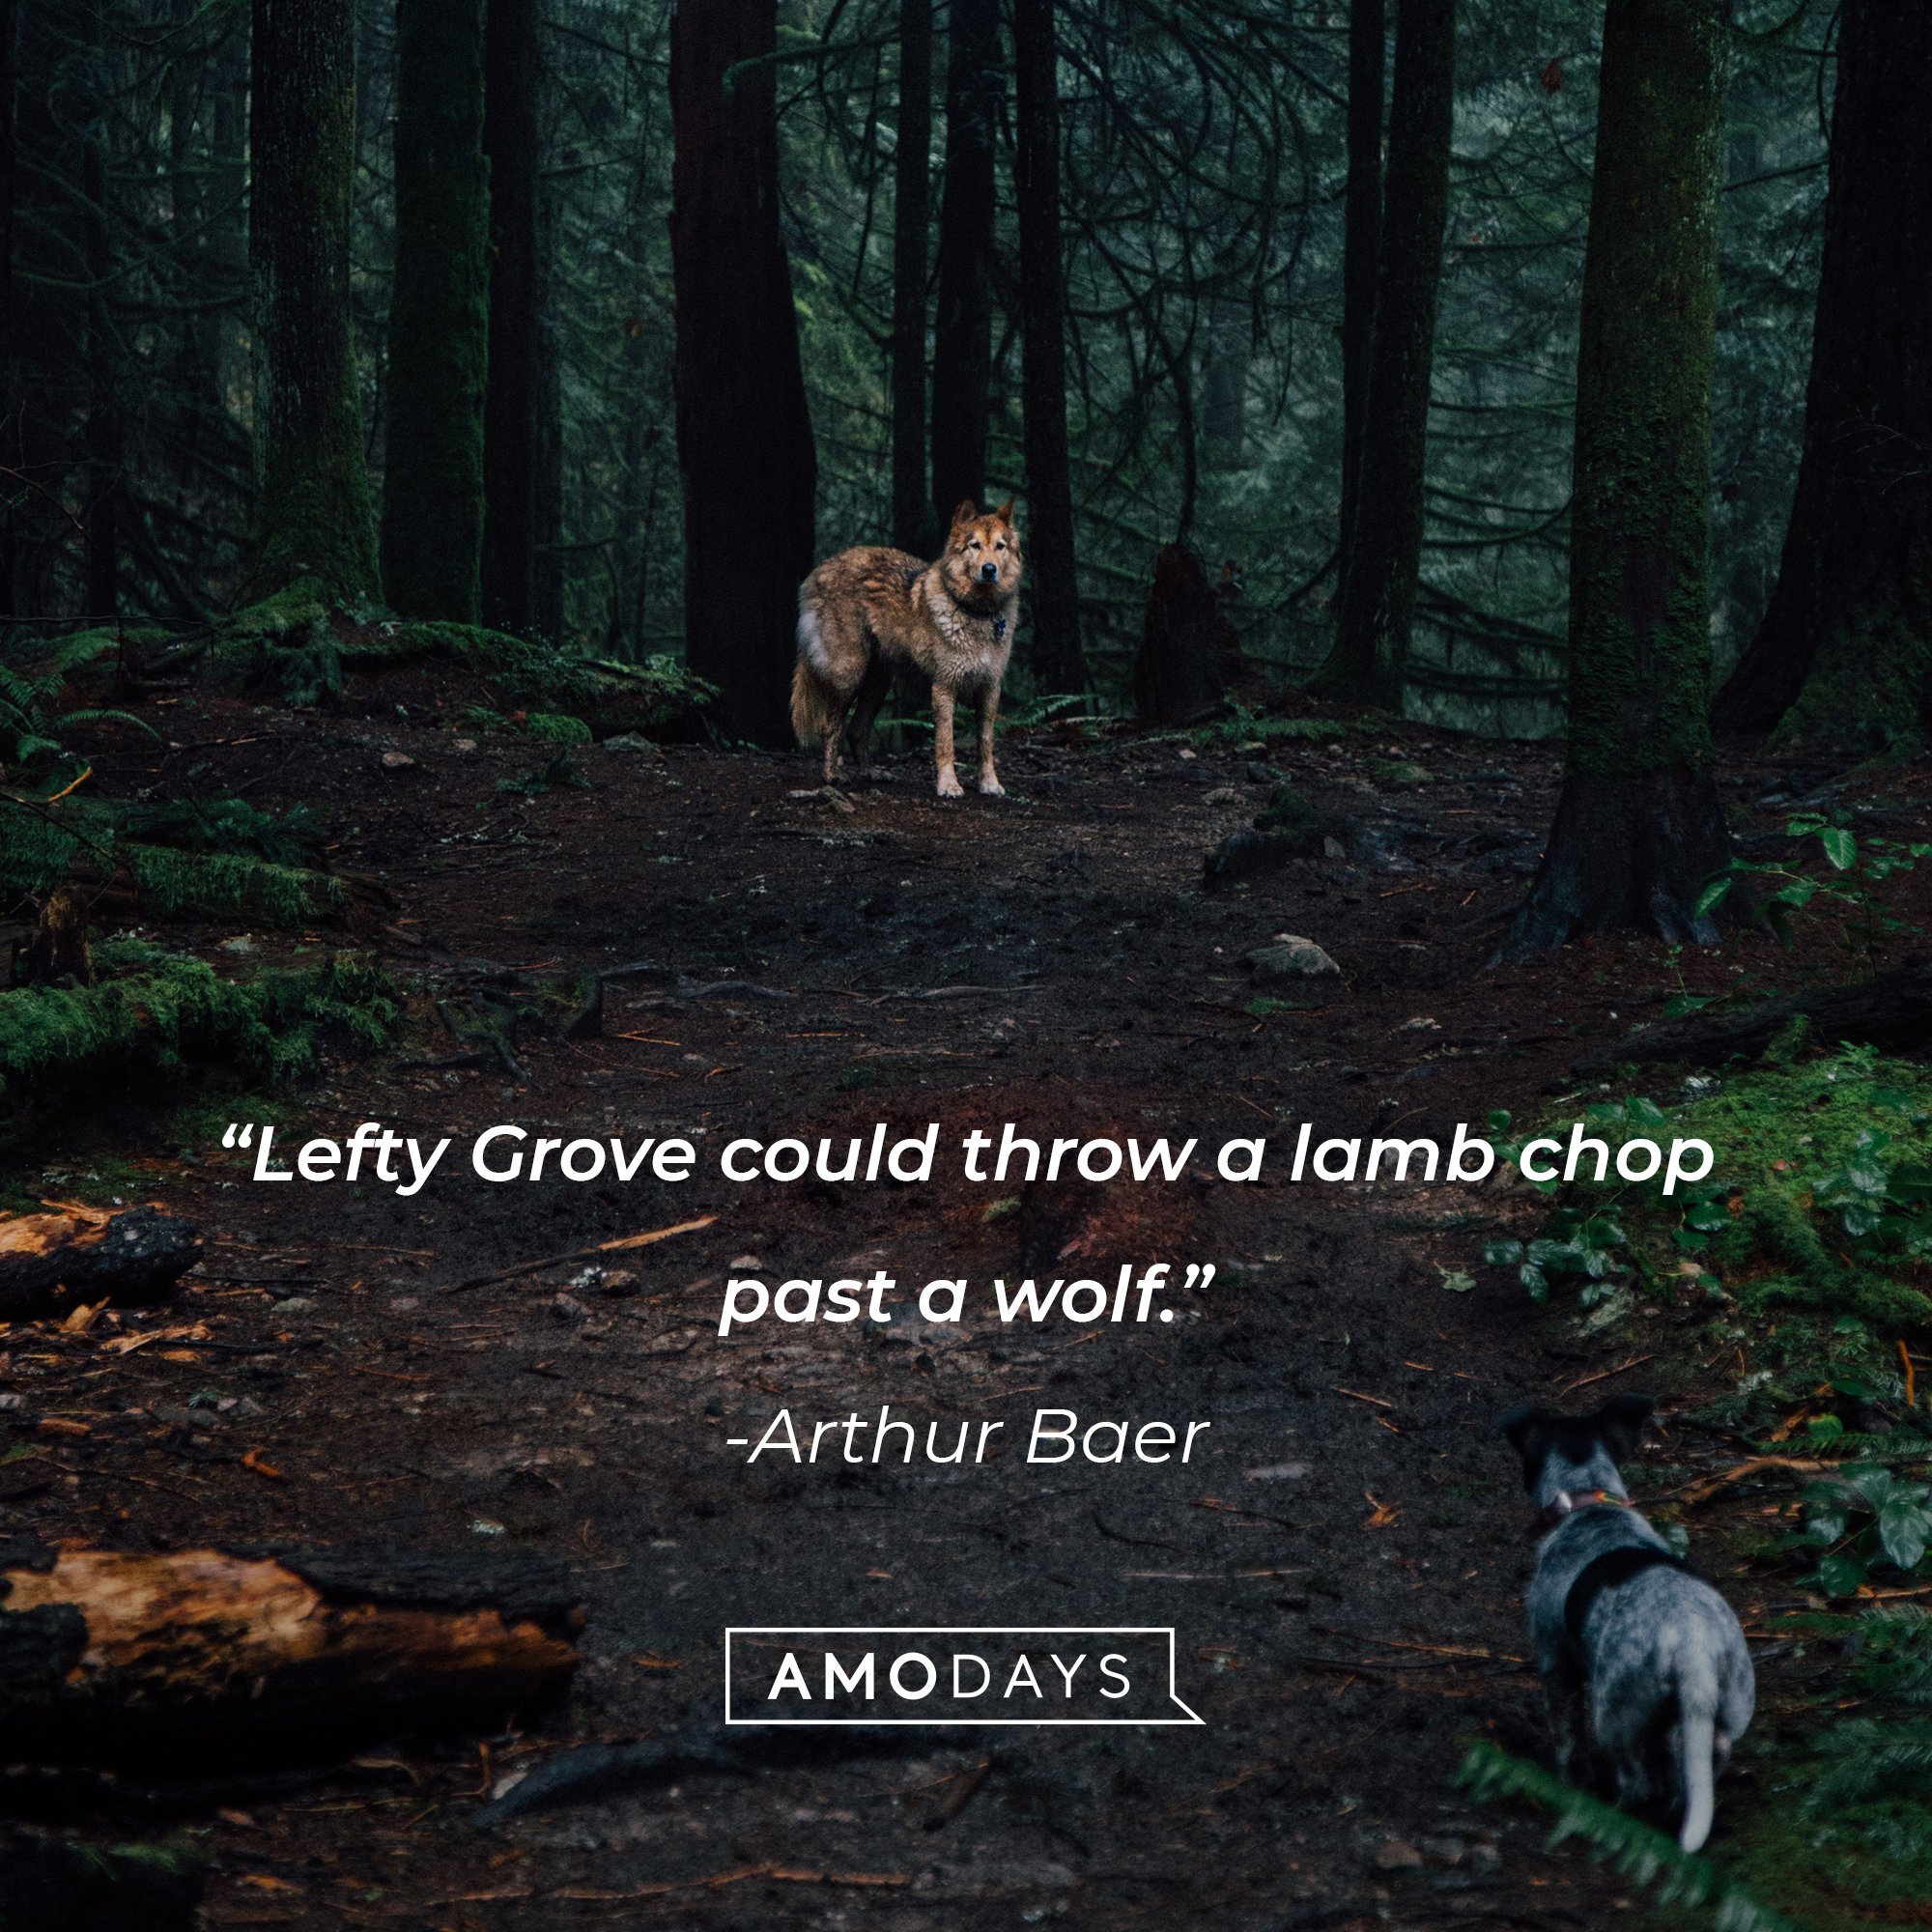 Arthur Baer's quote: “Lefty Grove could throw a lamb chop past a wolf.” | Image: AmoDays